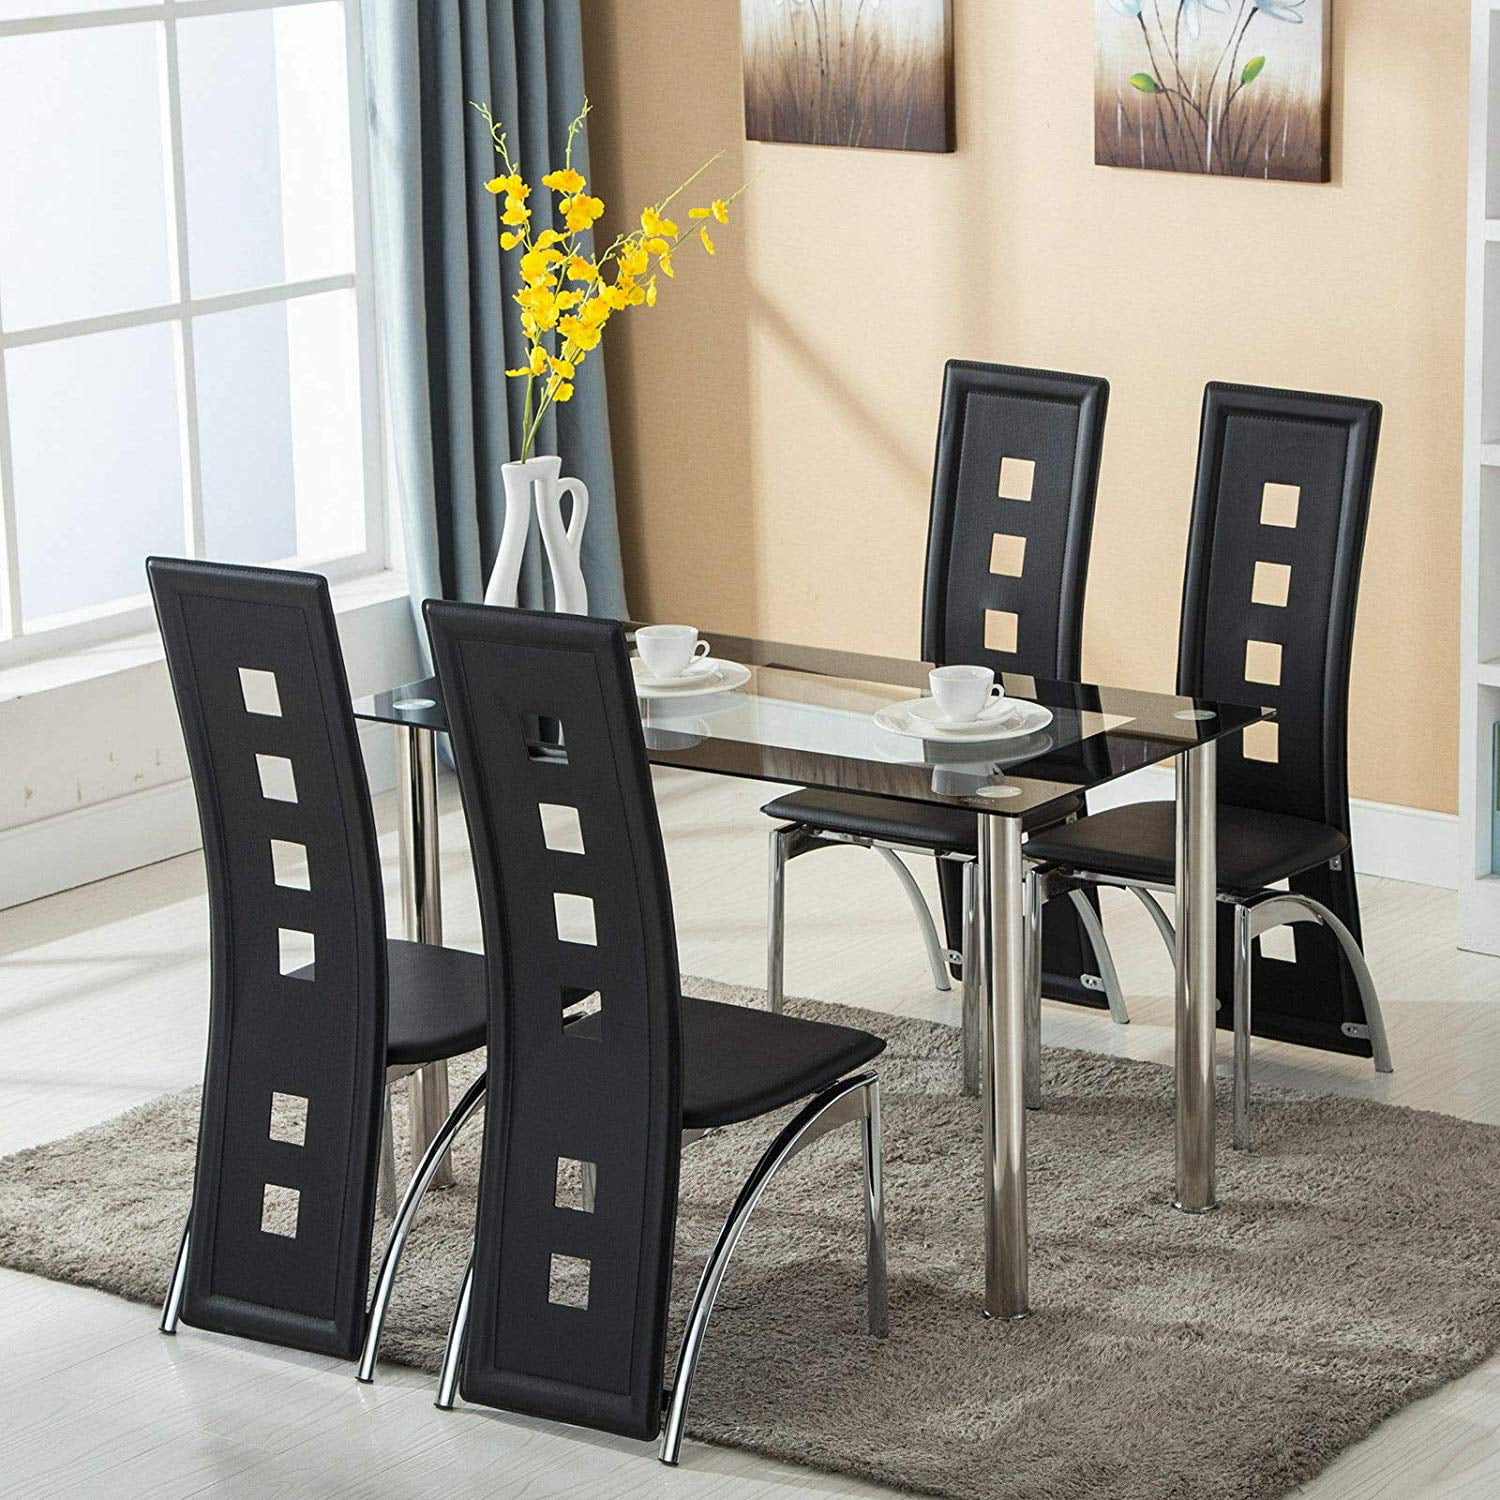 Modern 5 Piece Dining Table Set Tempered Glass Transparent Dining Table ...